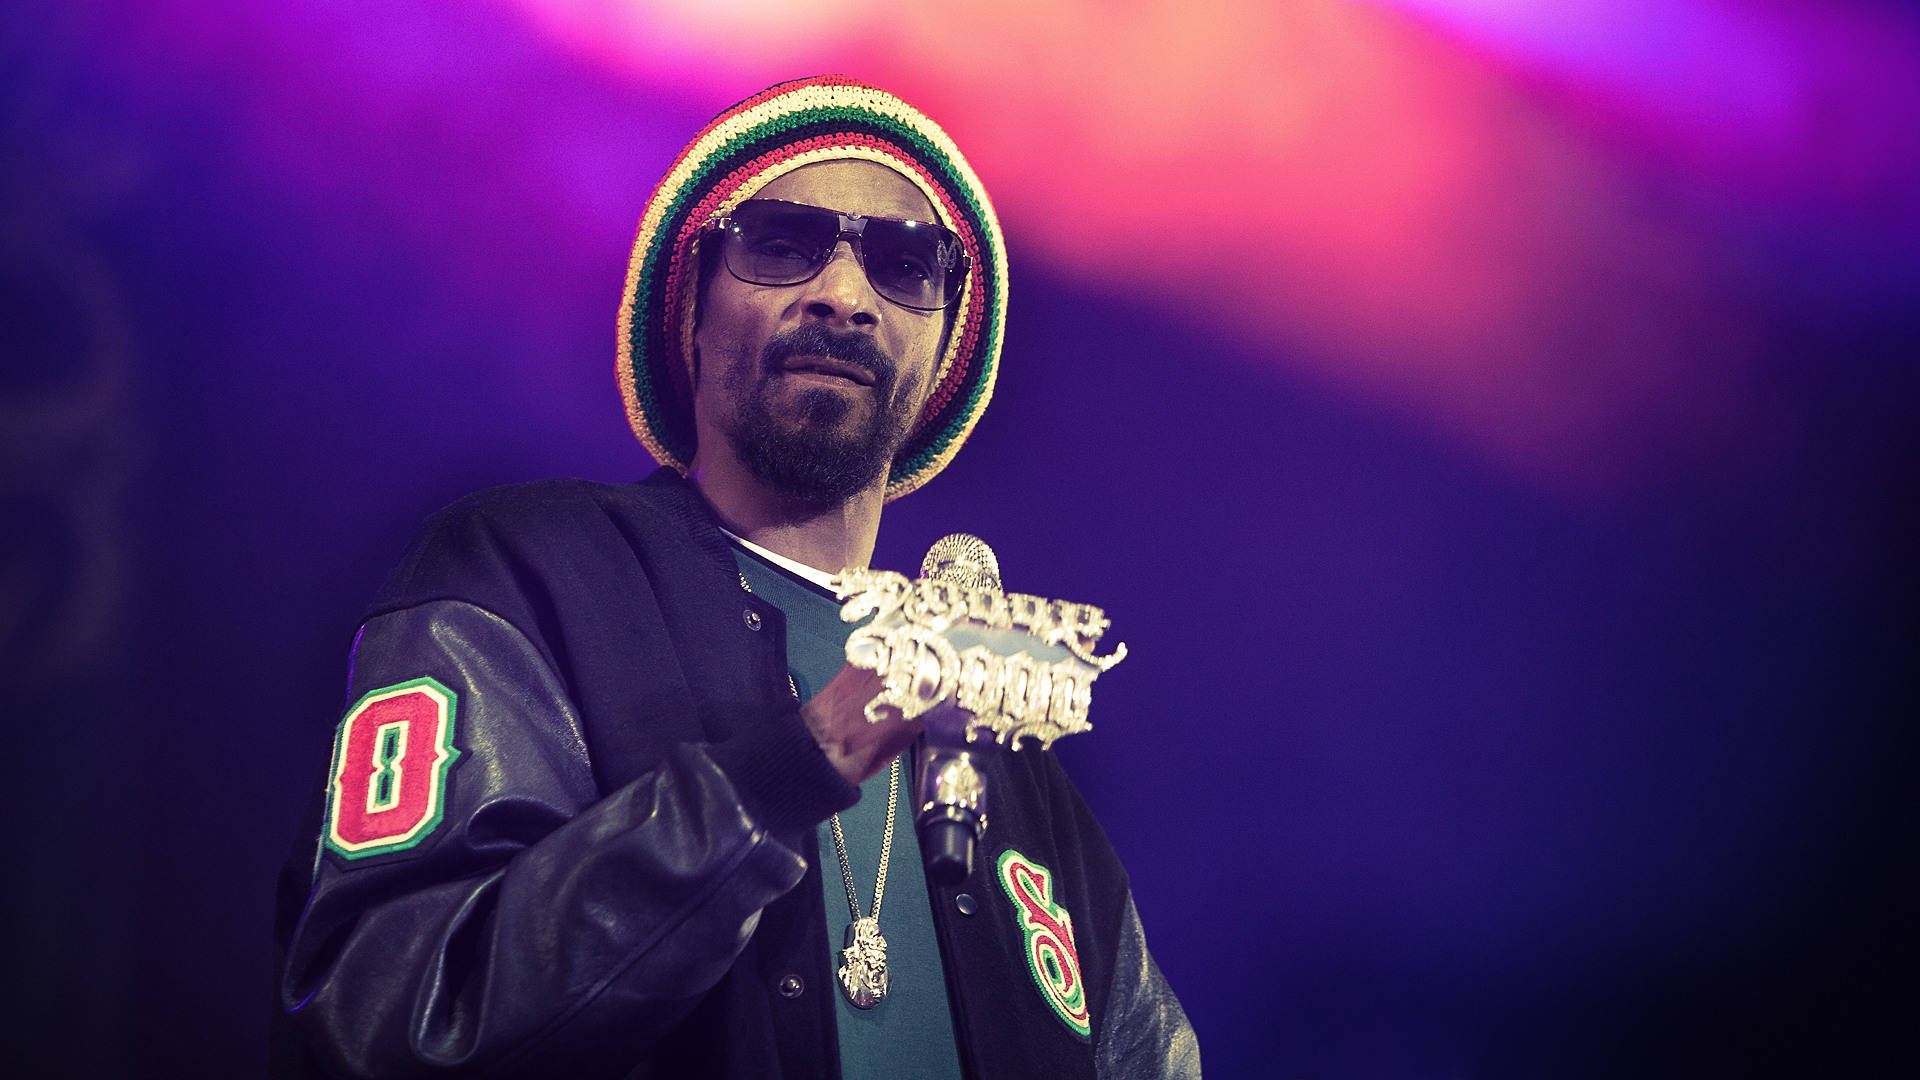 Snoop Dogg With Bejeweled Mic